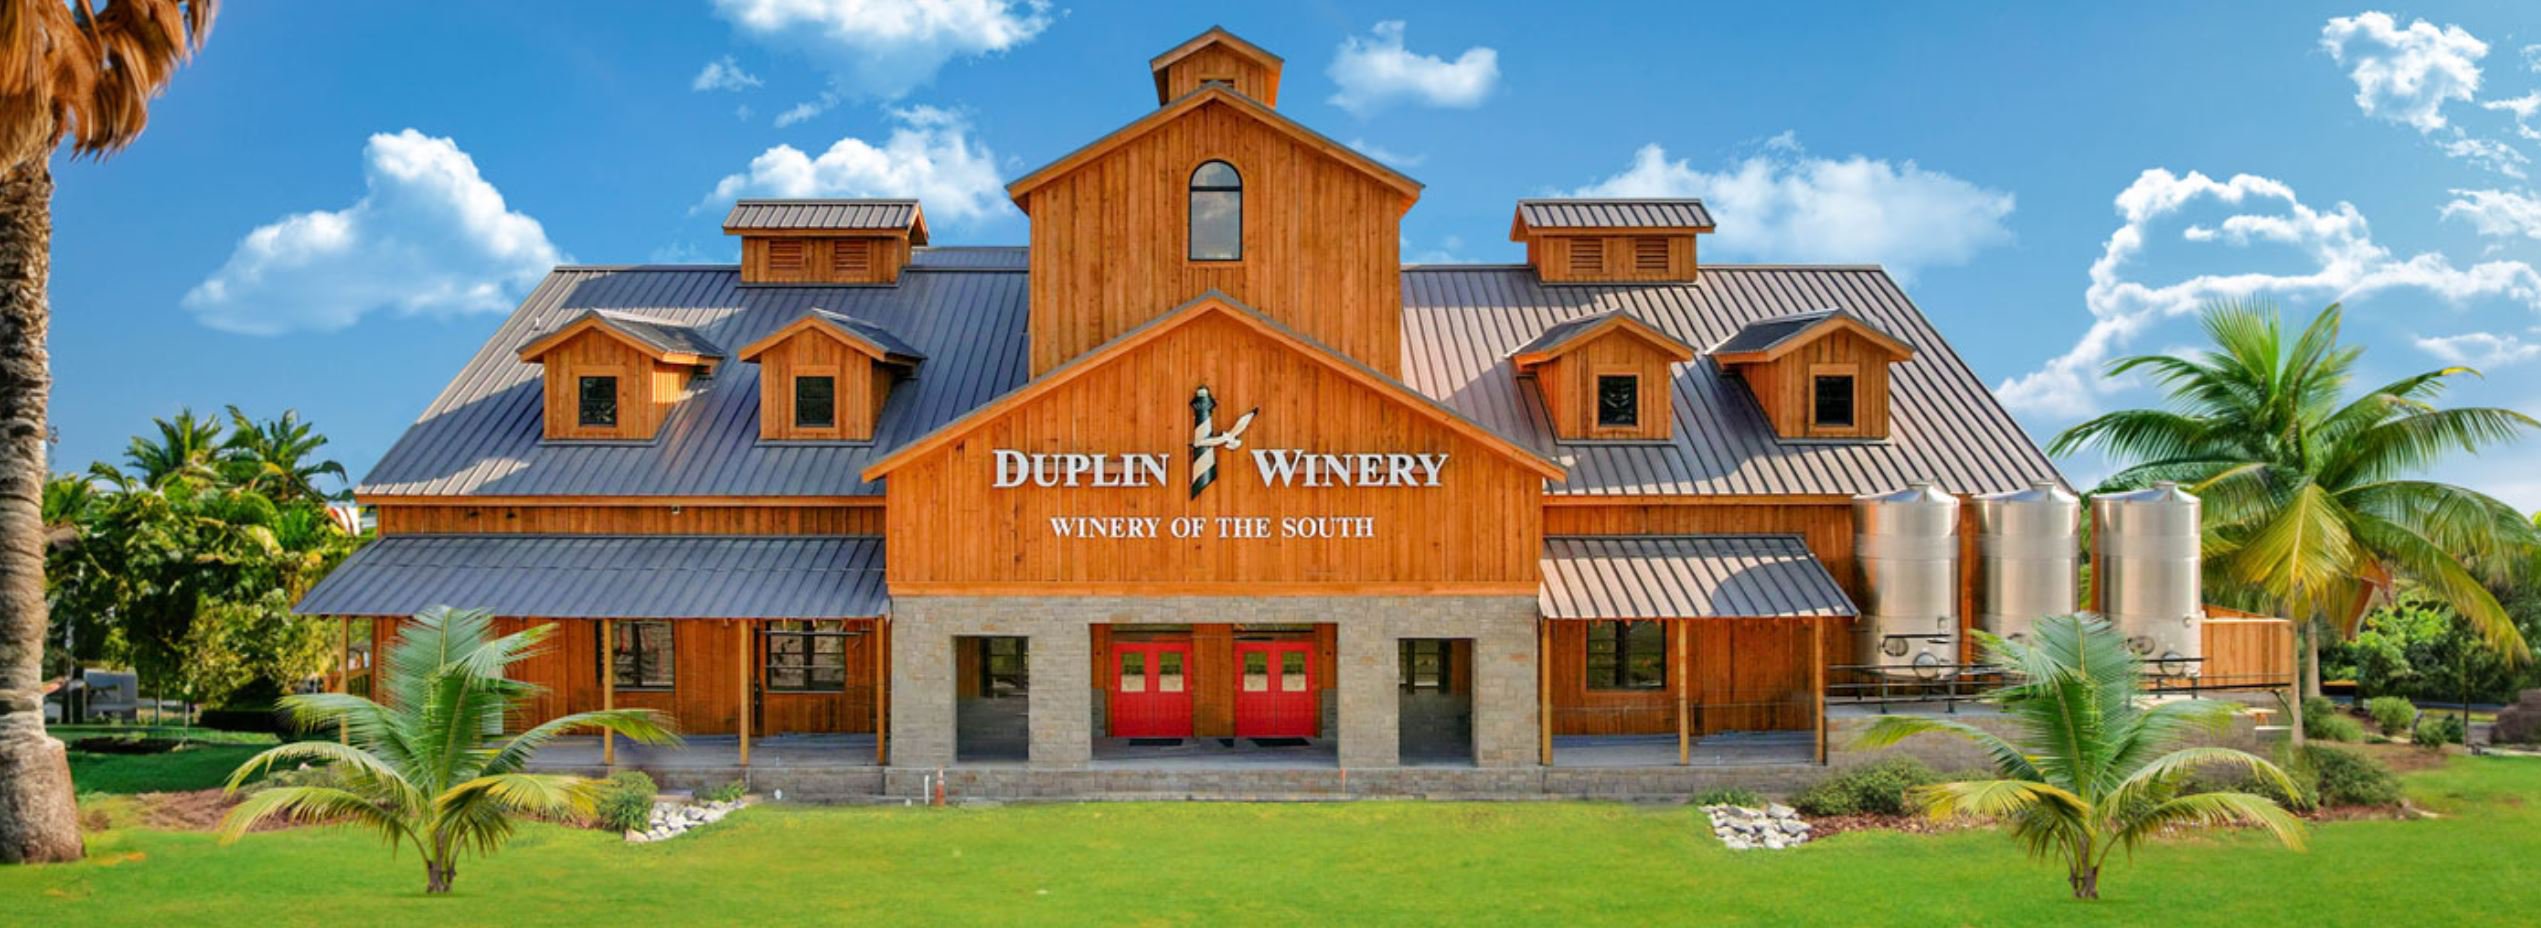 Things To Do https://30aescapes.icnd-cdn.com/images/thingstodo/Duplin Winery.JPG